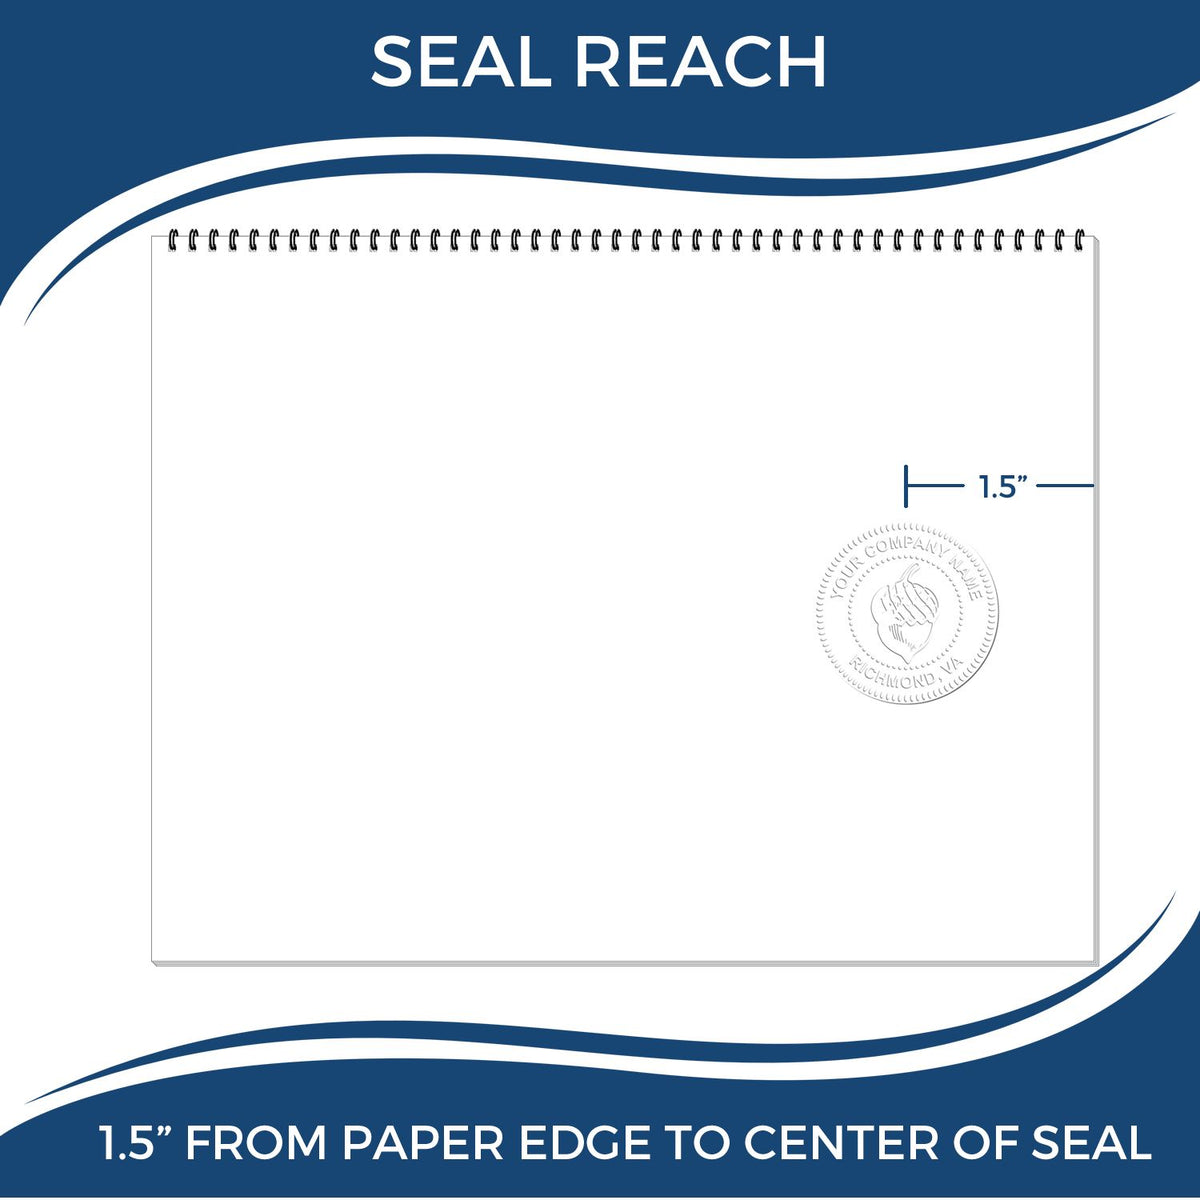 An infographic showing the seal reach which is represented by a ruler and a miniature seal image of the Gift Iowa Architect Seal